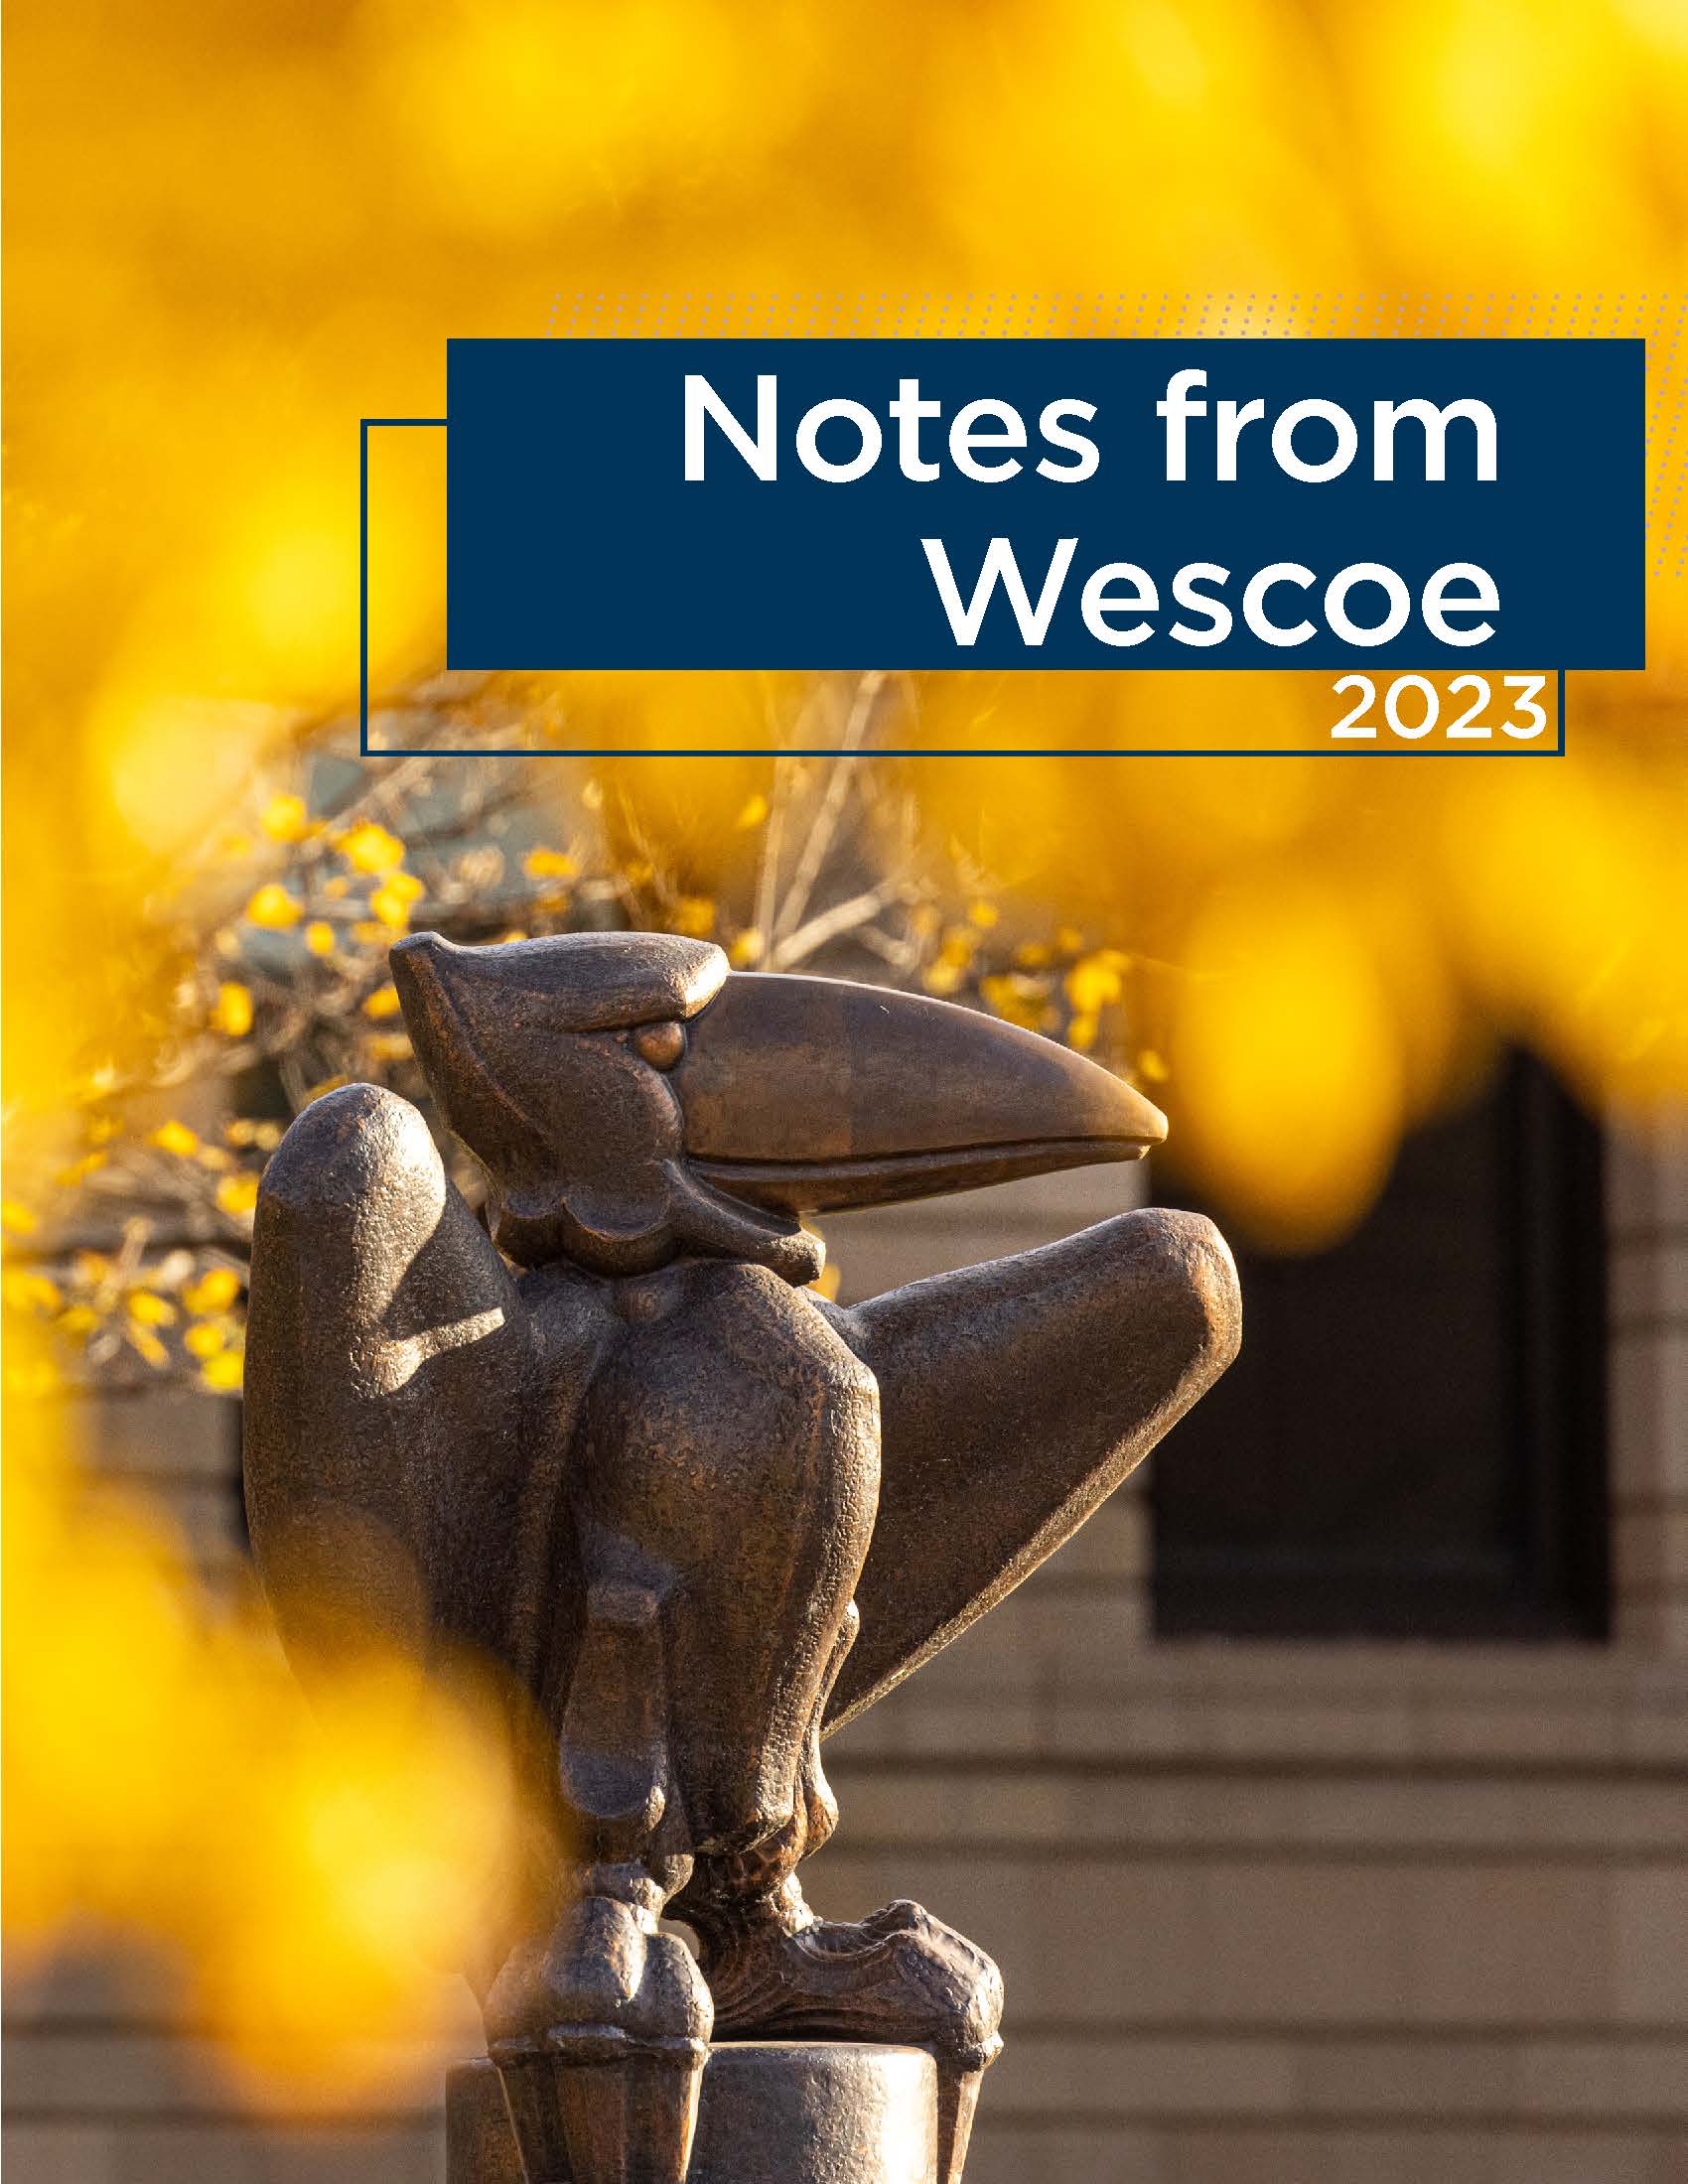 ""Front page of Notes from Wescoe 2023